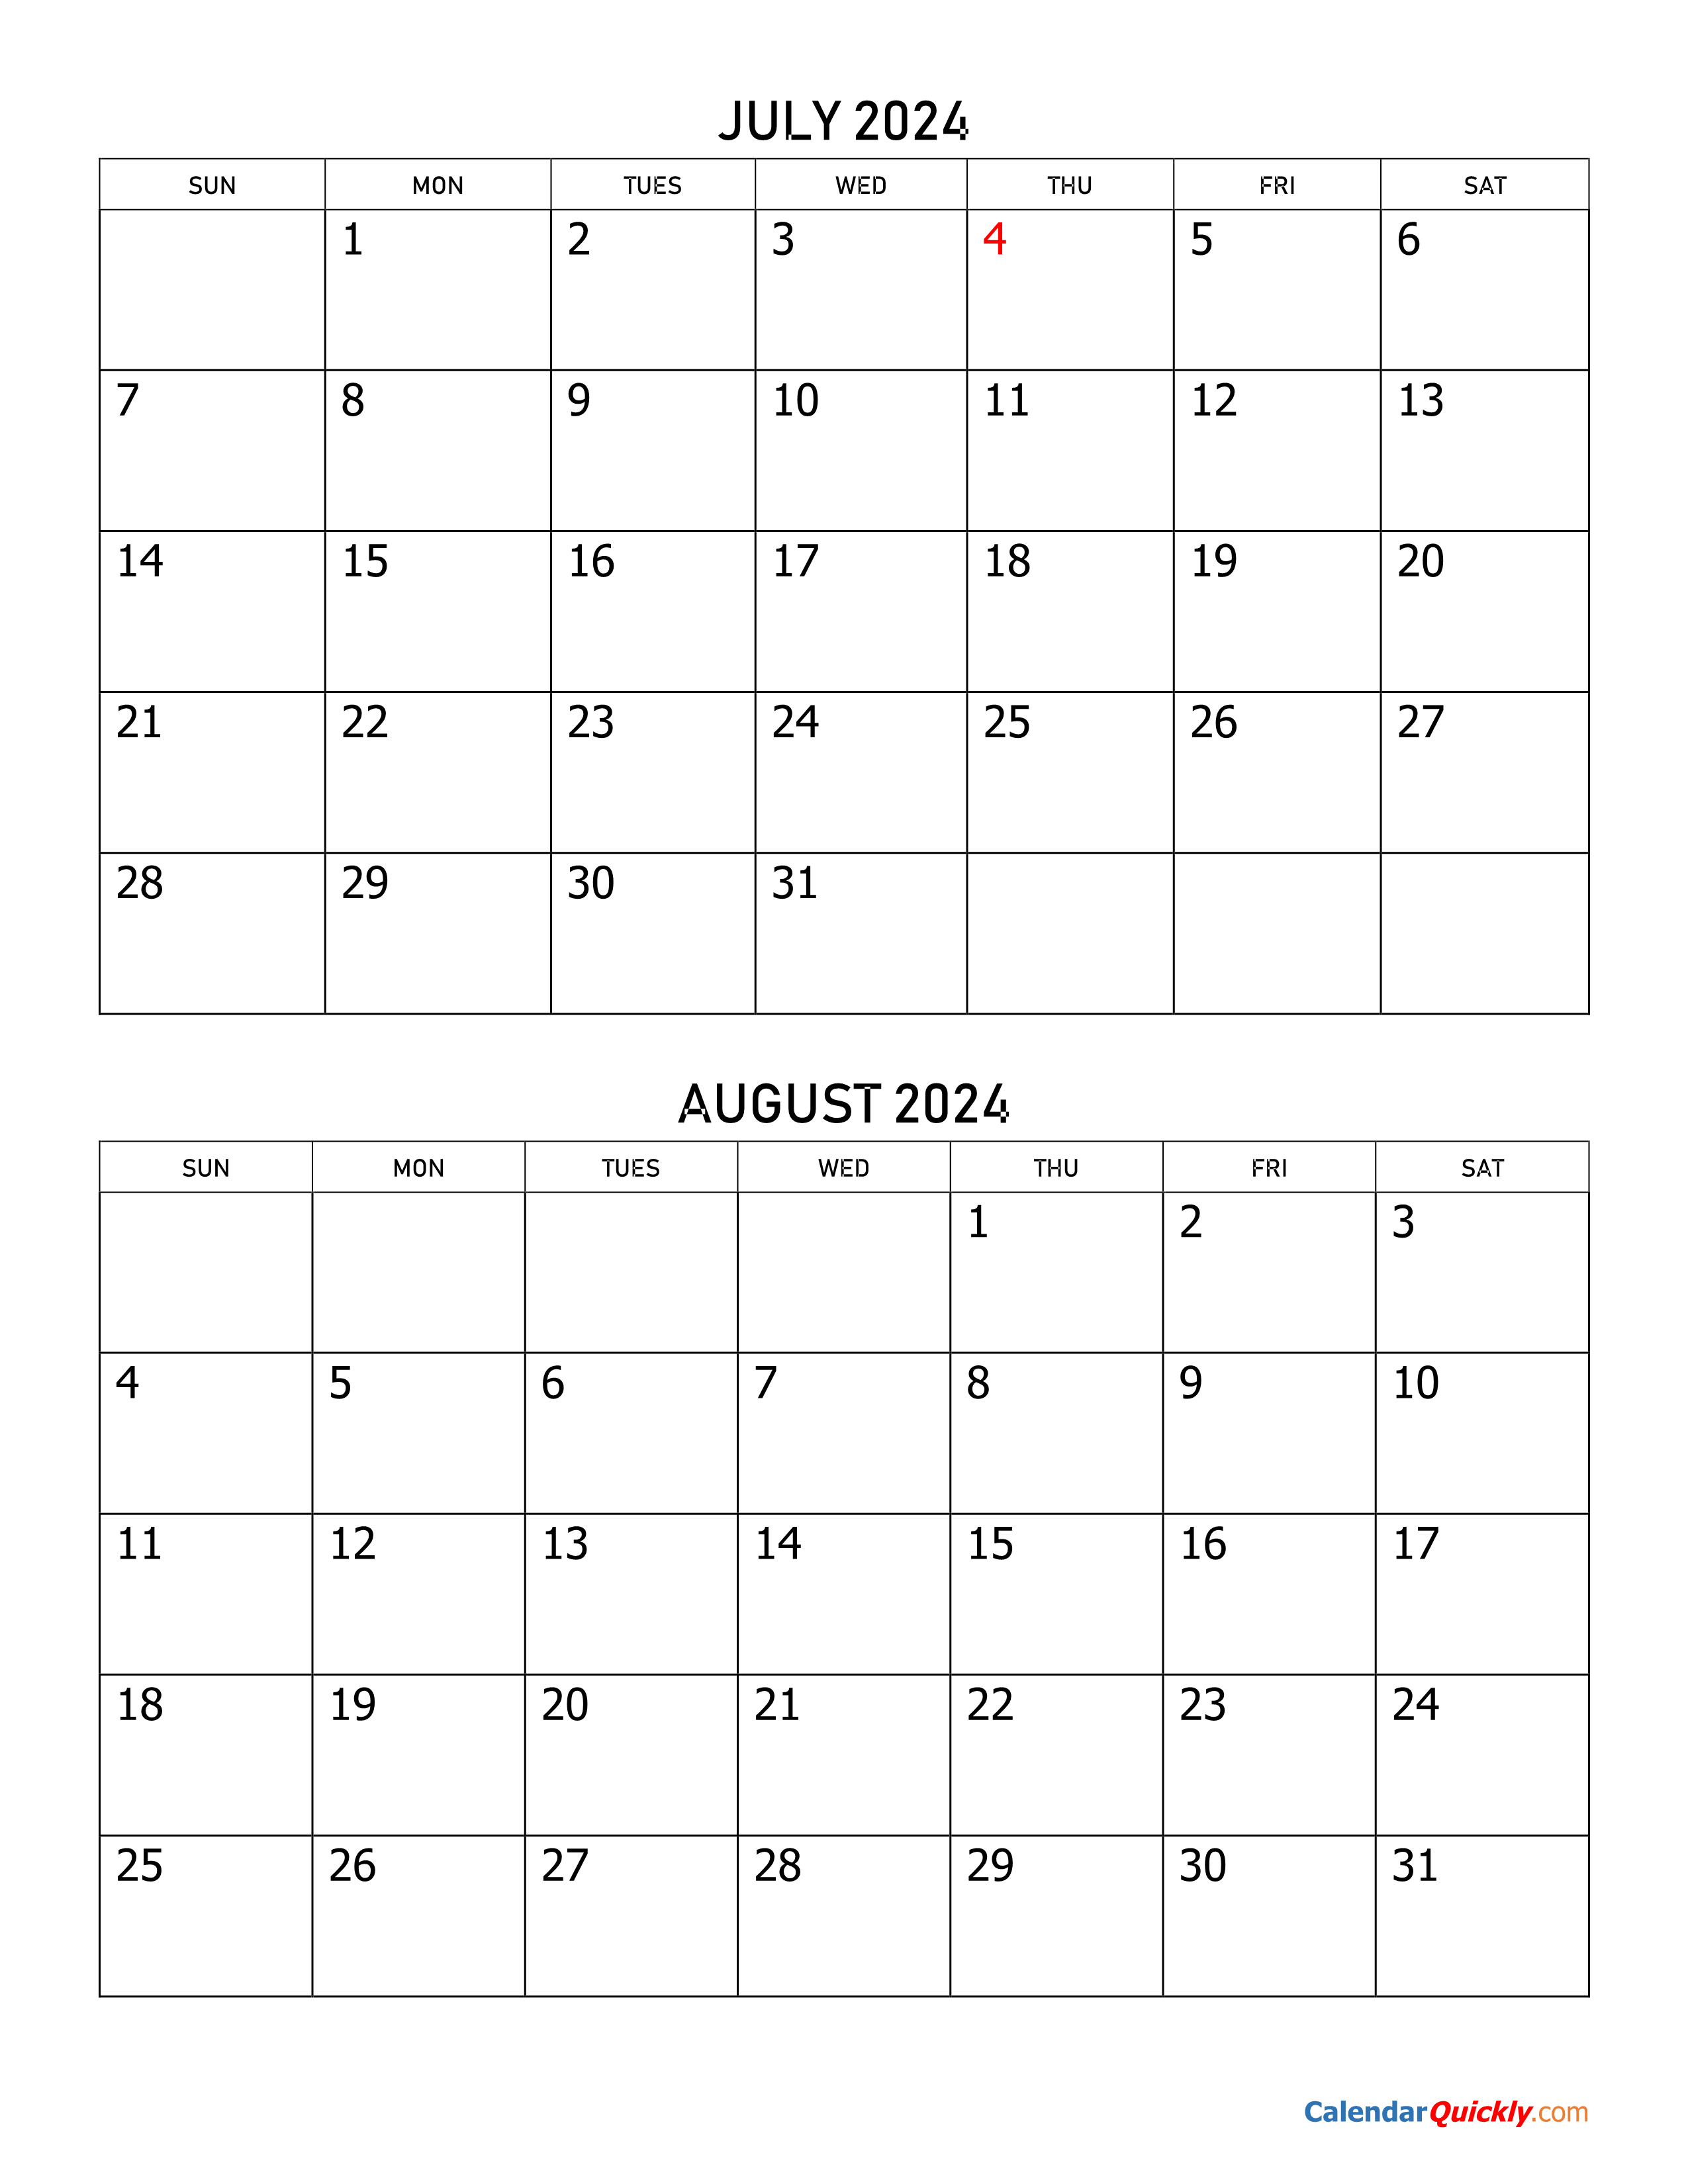 july-and-august-2024-calendar-calendar-quickly